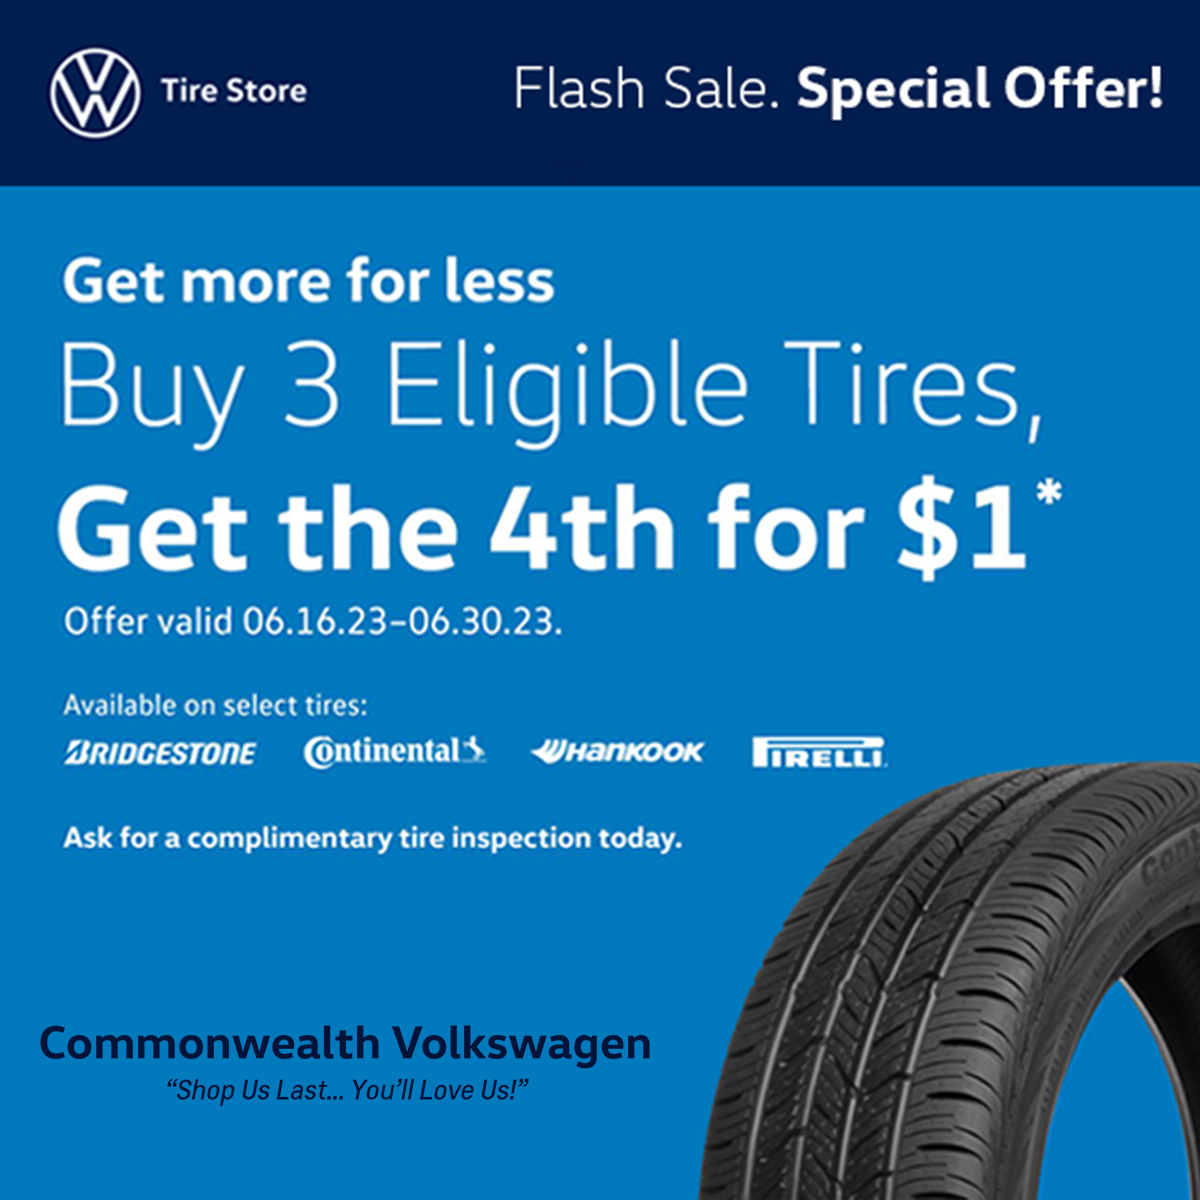 Enjoy this incredible offer on a new set of tires! 🔥 Buy 3 Eligible Tires, Get the 4th for $1* Now Thru June 30th. Shop here: bit.ly/CMVWtires

 #tires #vw #service #newtires #boston #ma #lawrence #local #tire #save